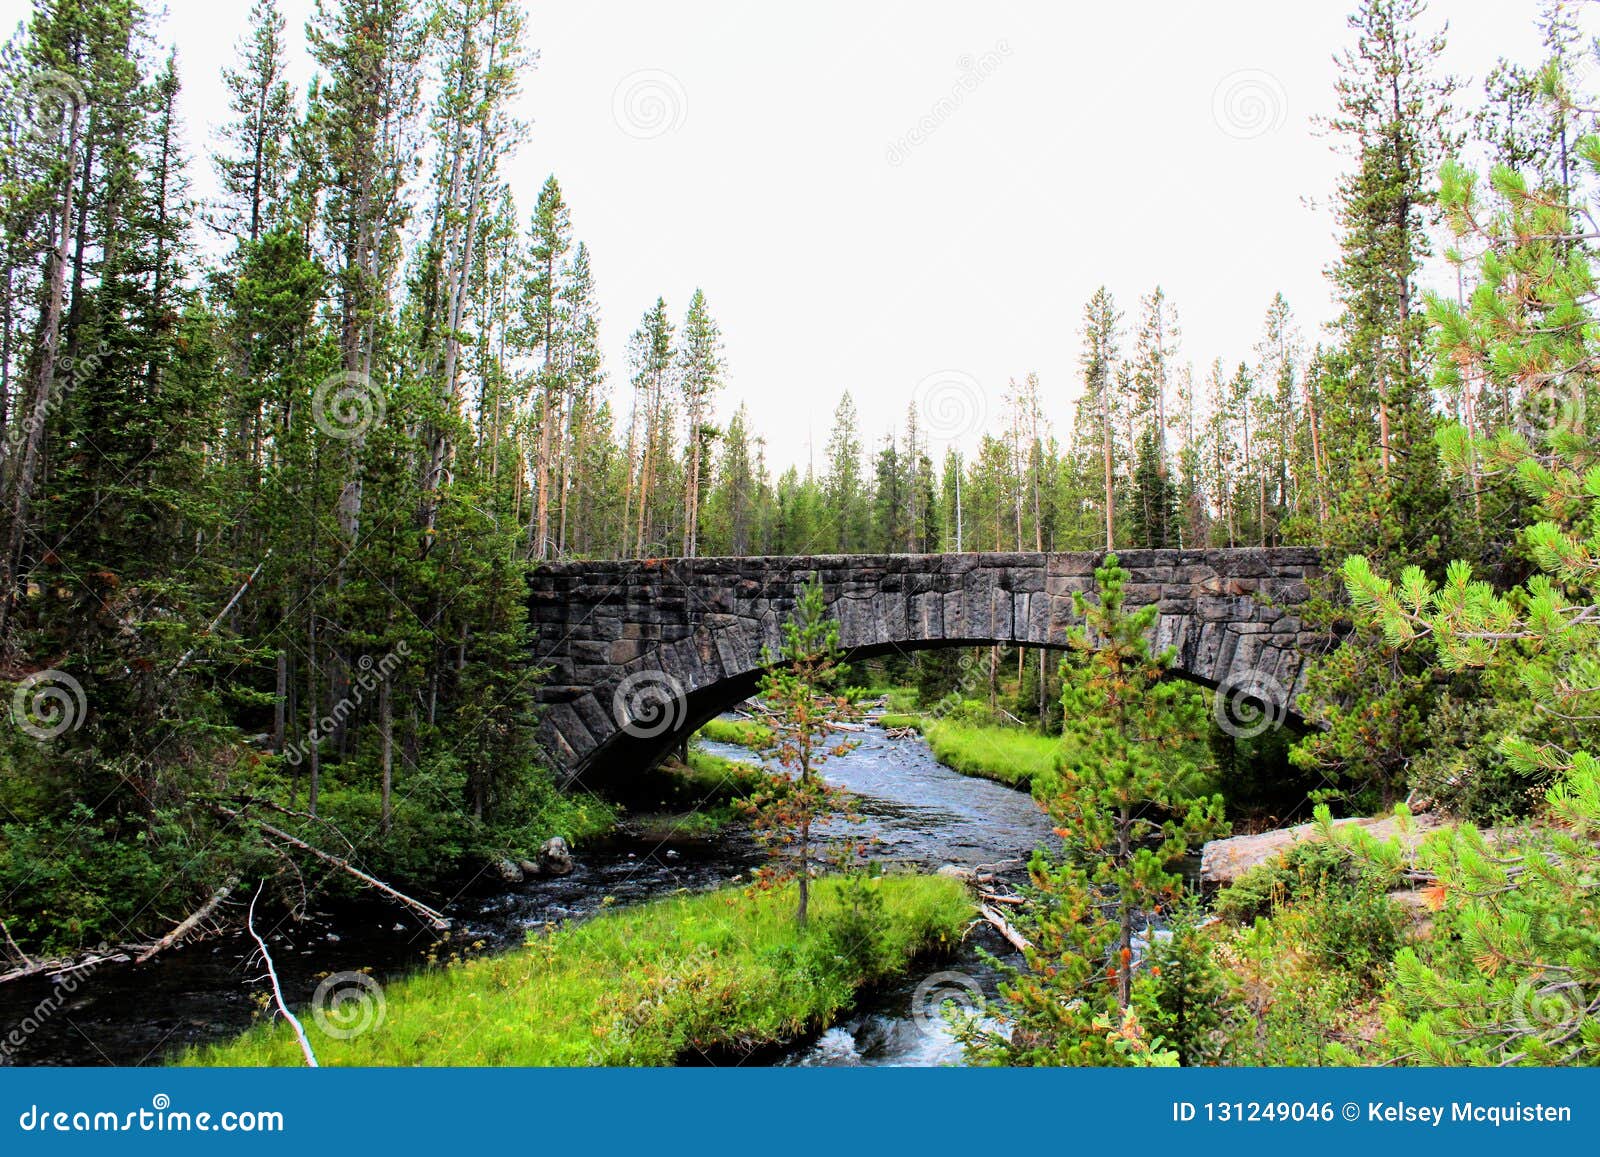 yellowstone national park beautiful bridge with rocks and moss and woodlands gorgeous colors